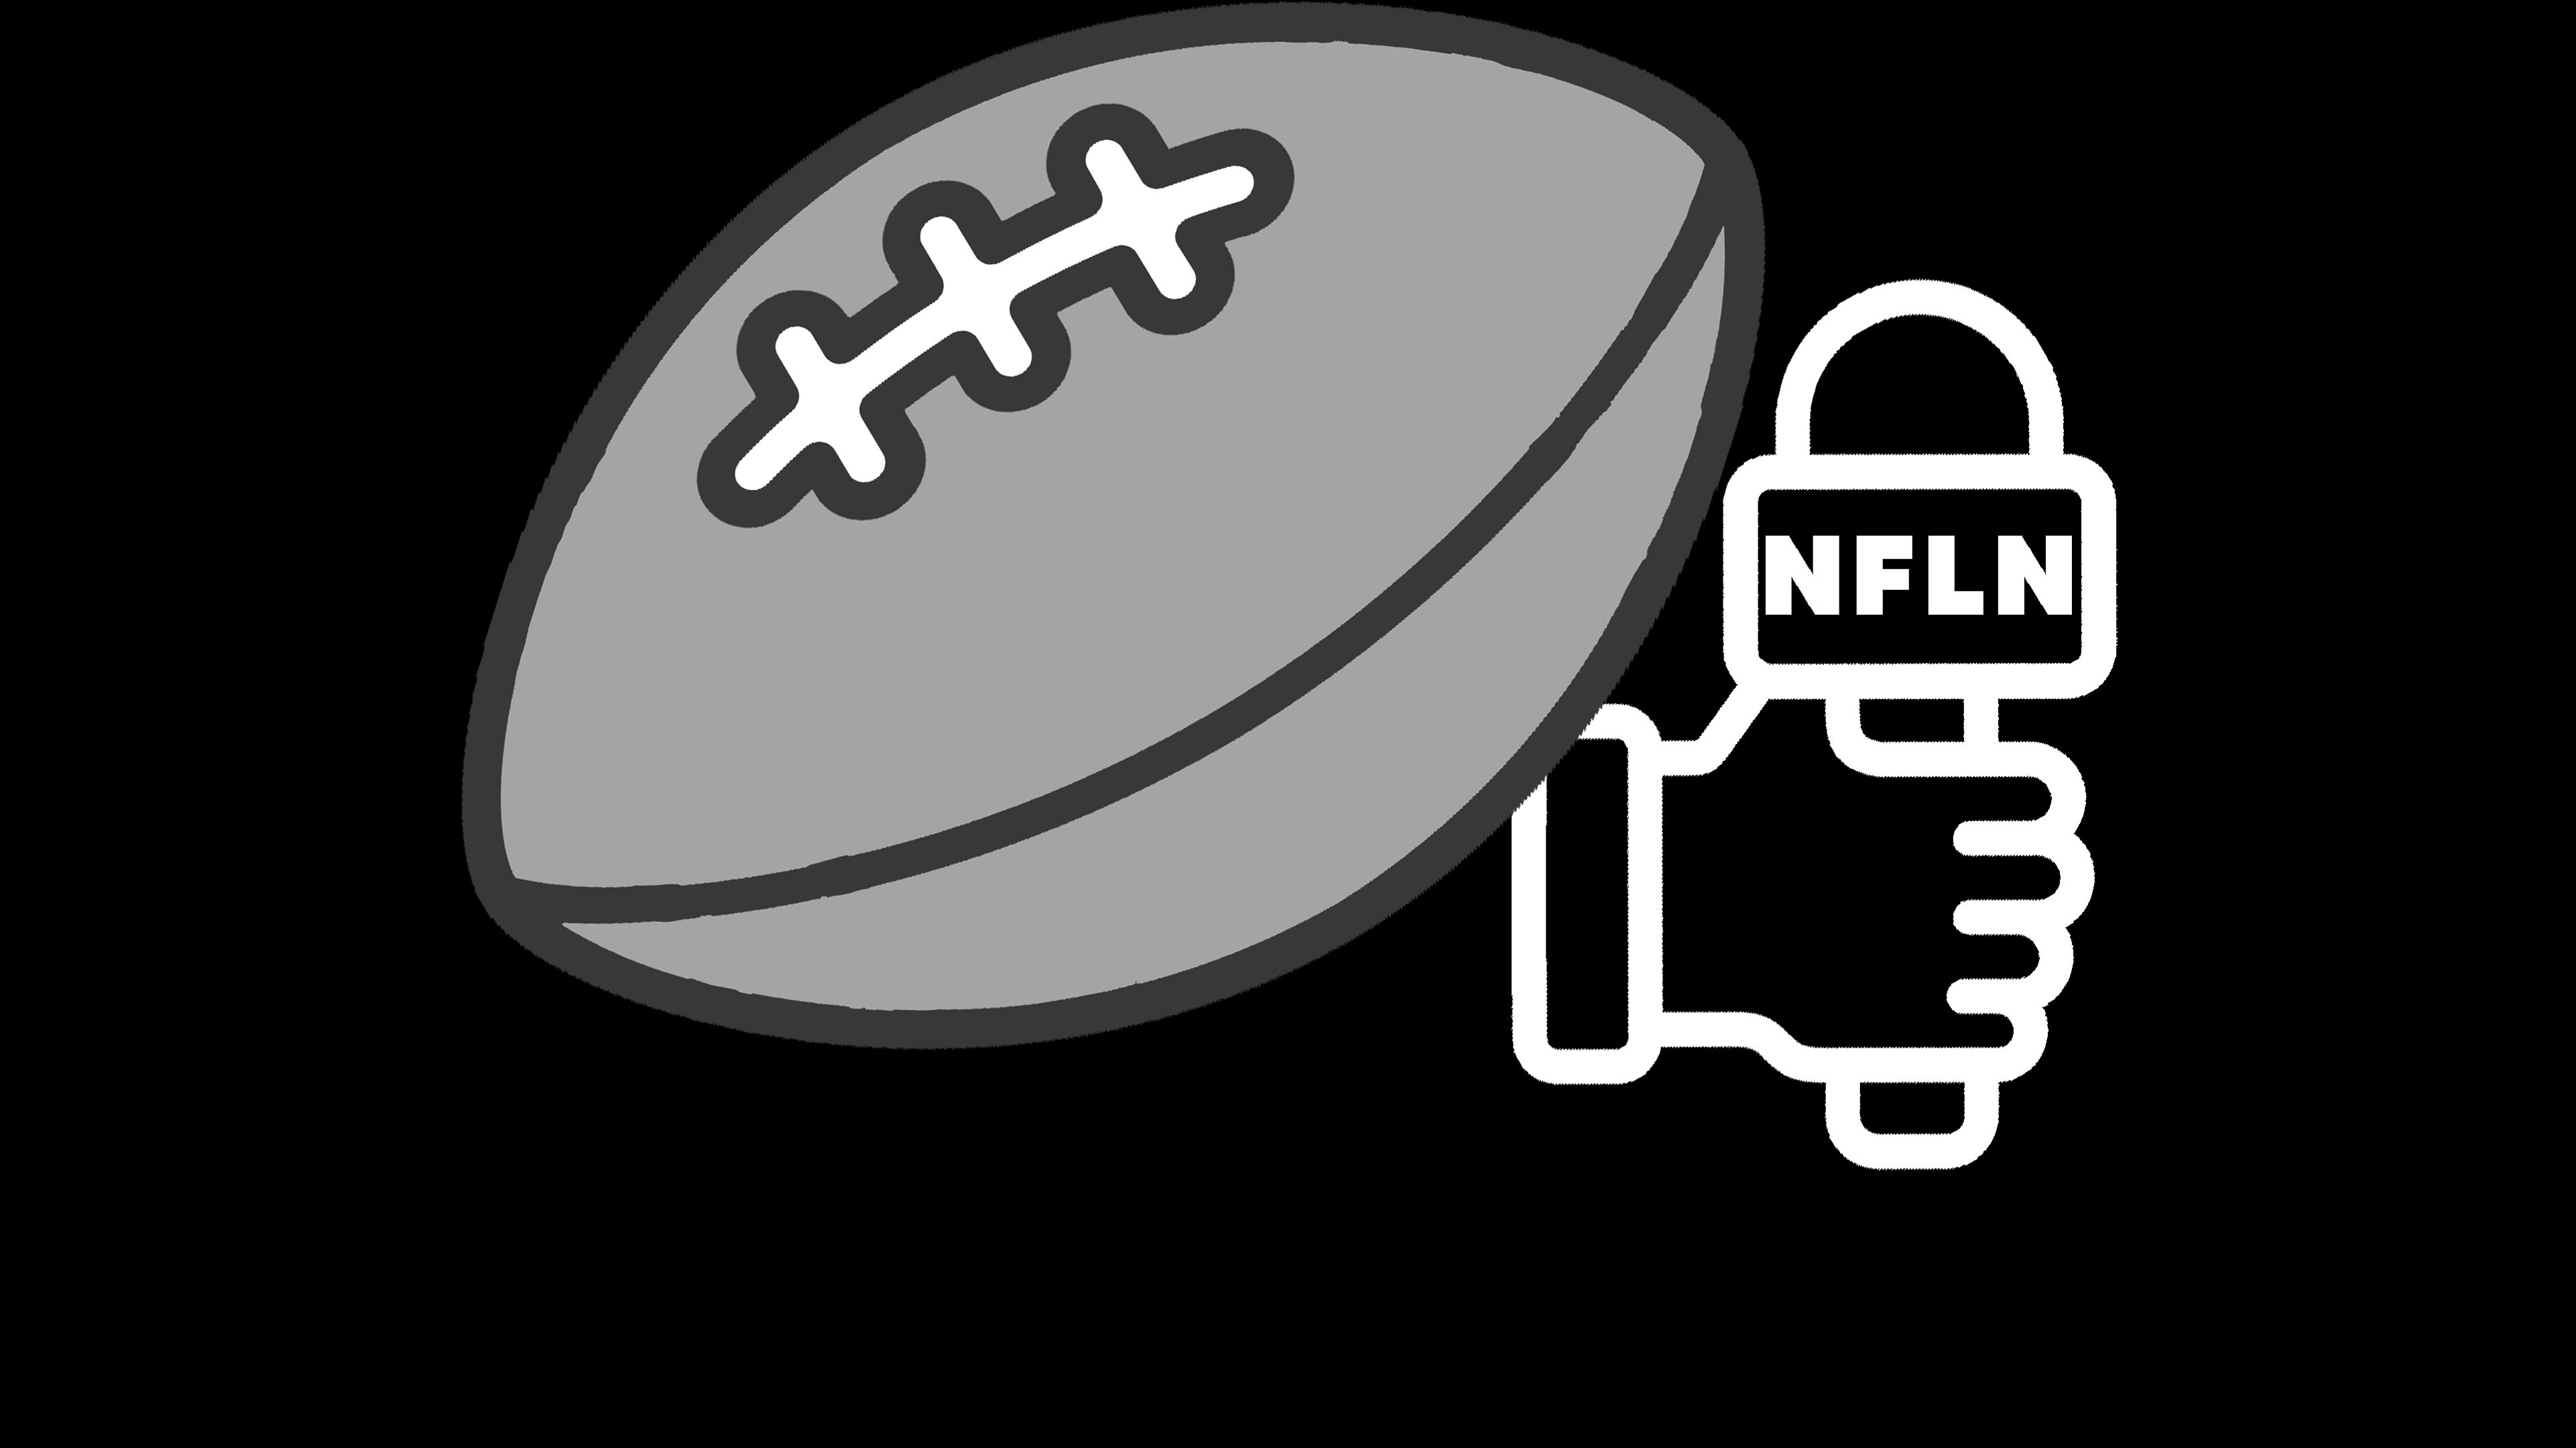 how to watch nfl network today